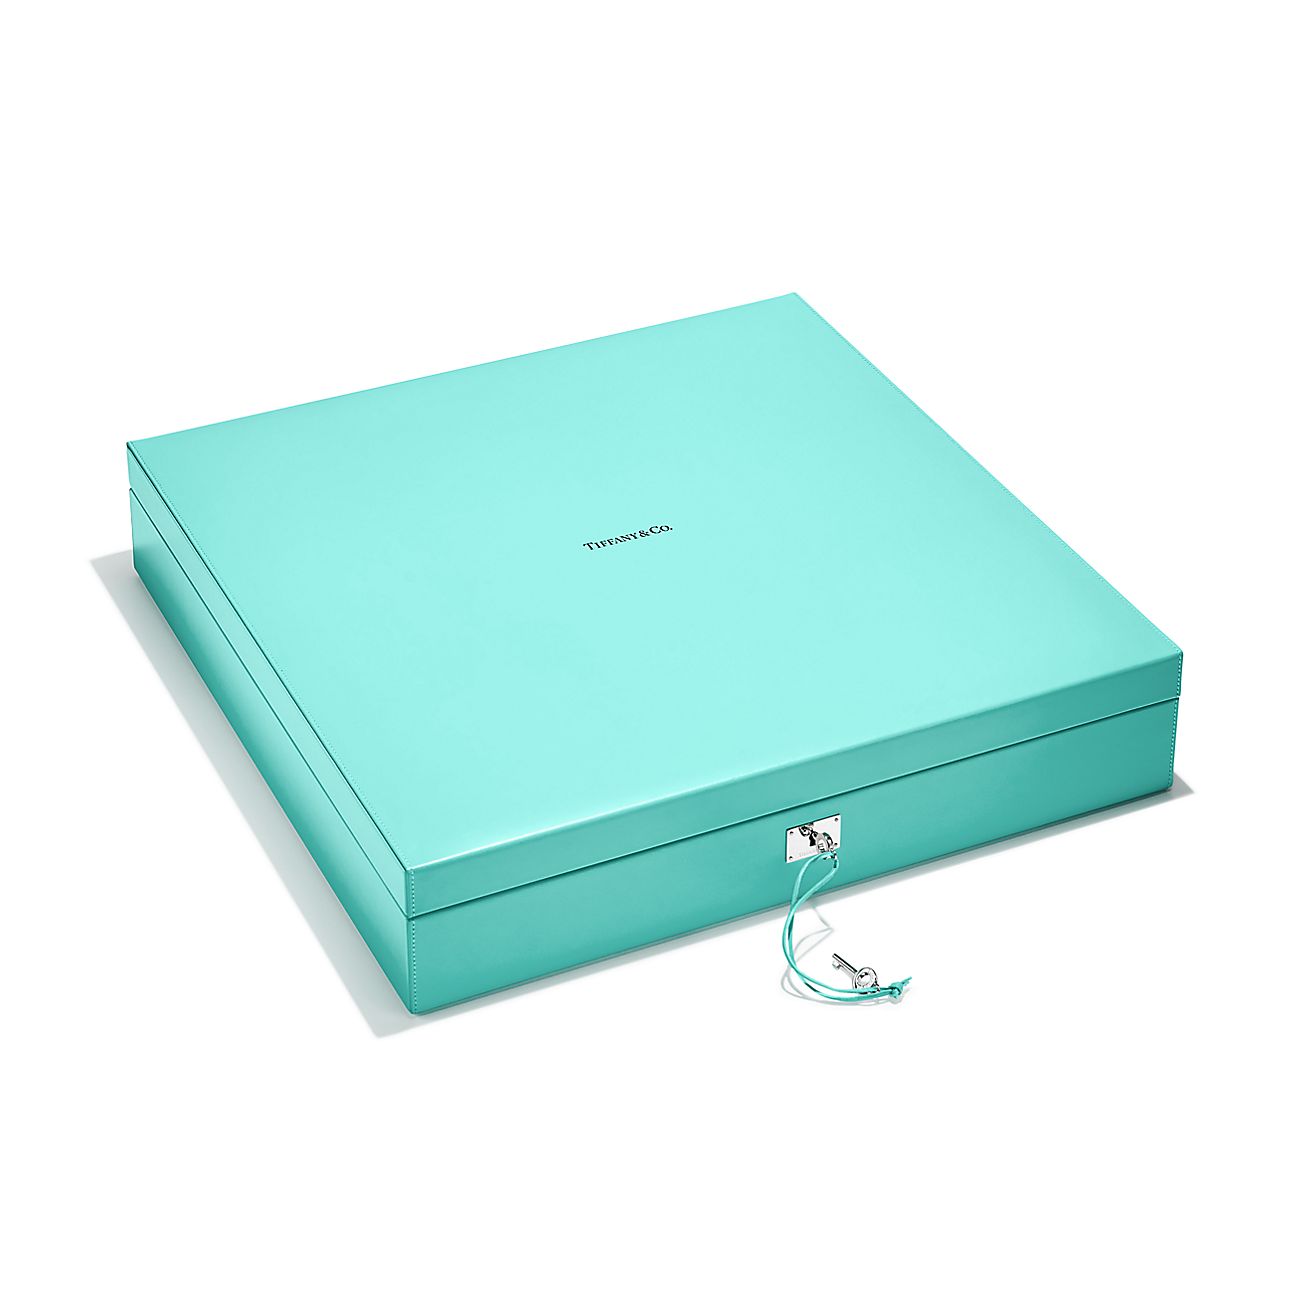 Tiffany & Co. Launches Mahjong and Chess Set